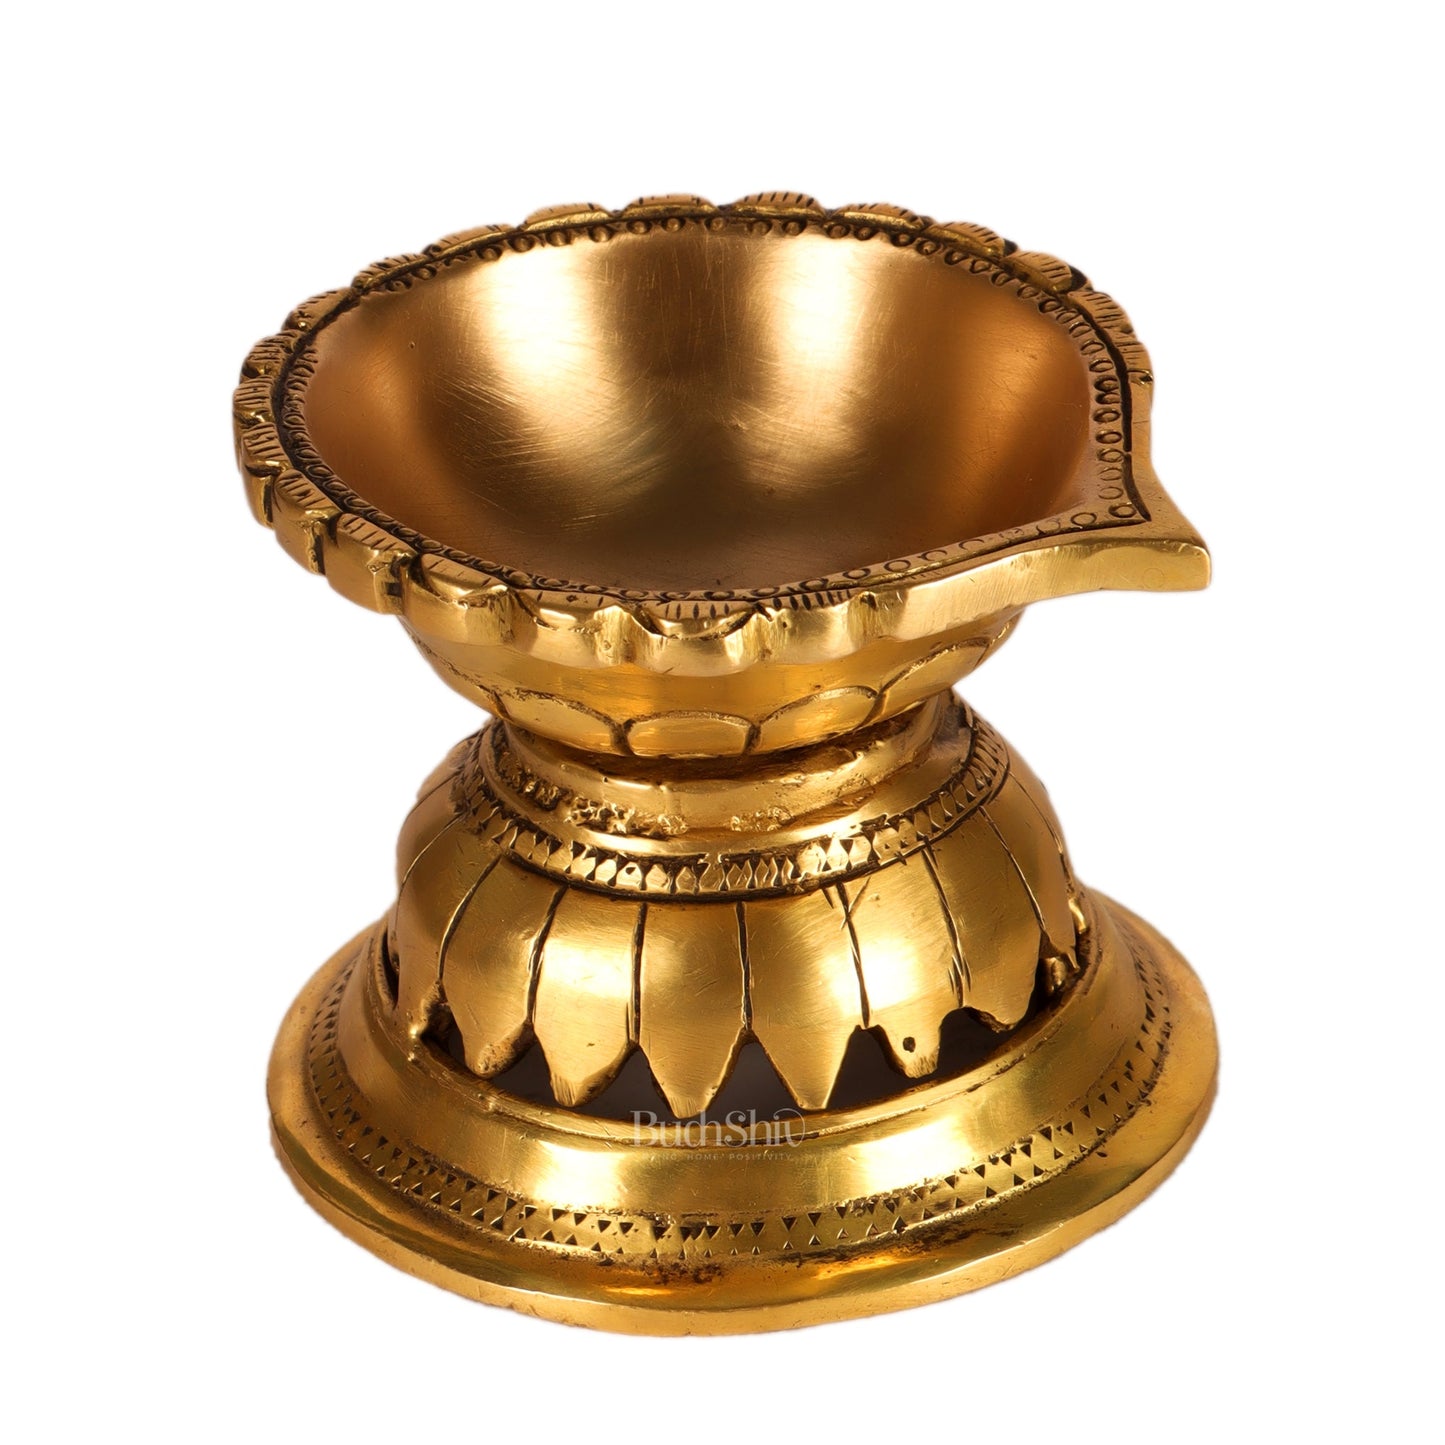 Handcrafted Brass Diya with Reverse Lotus Design - 4 inches - Budhshiv.com